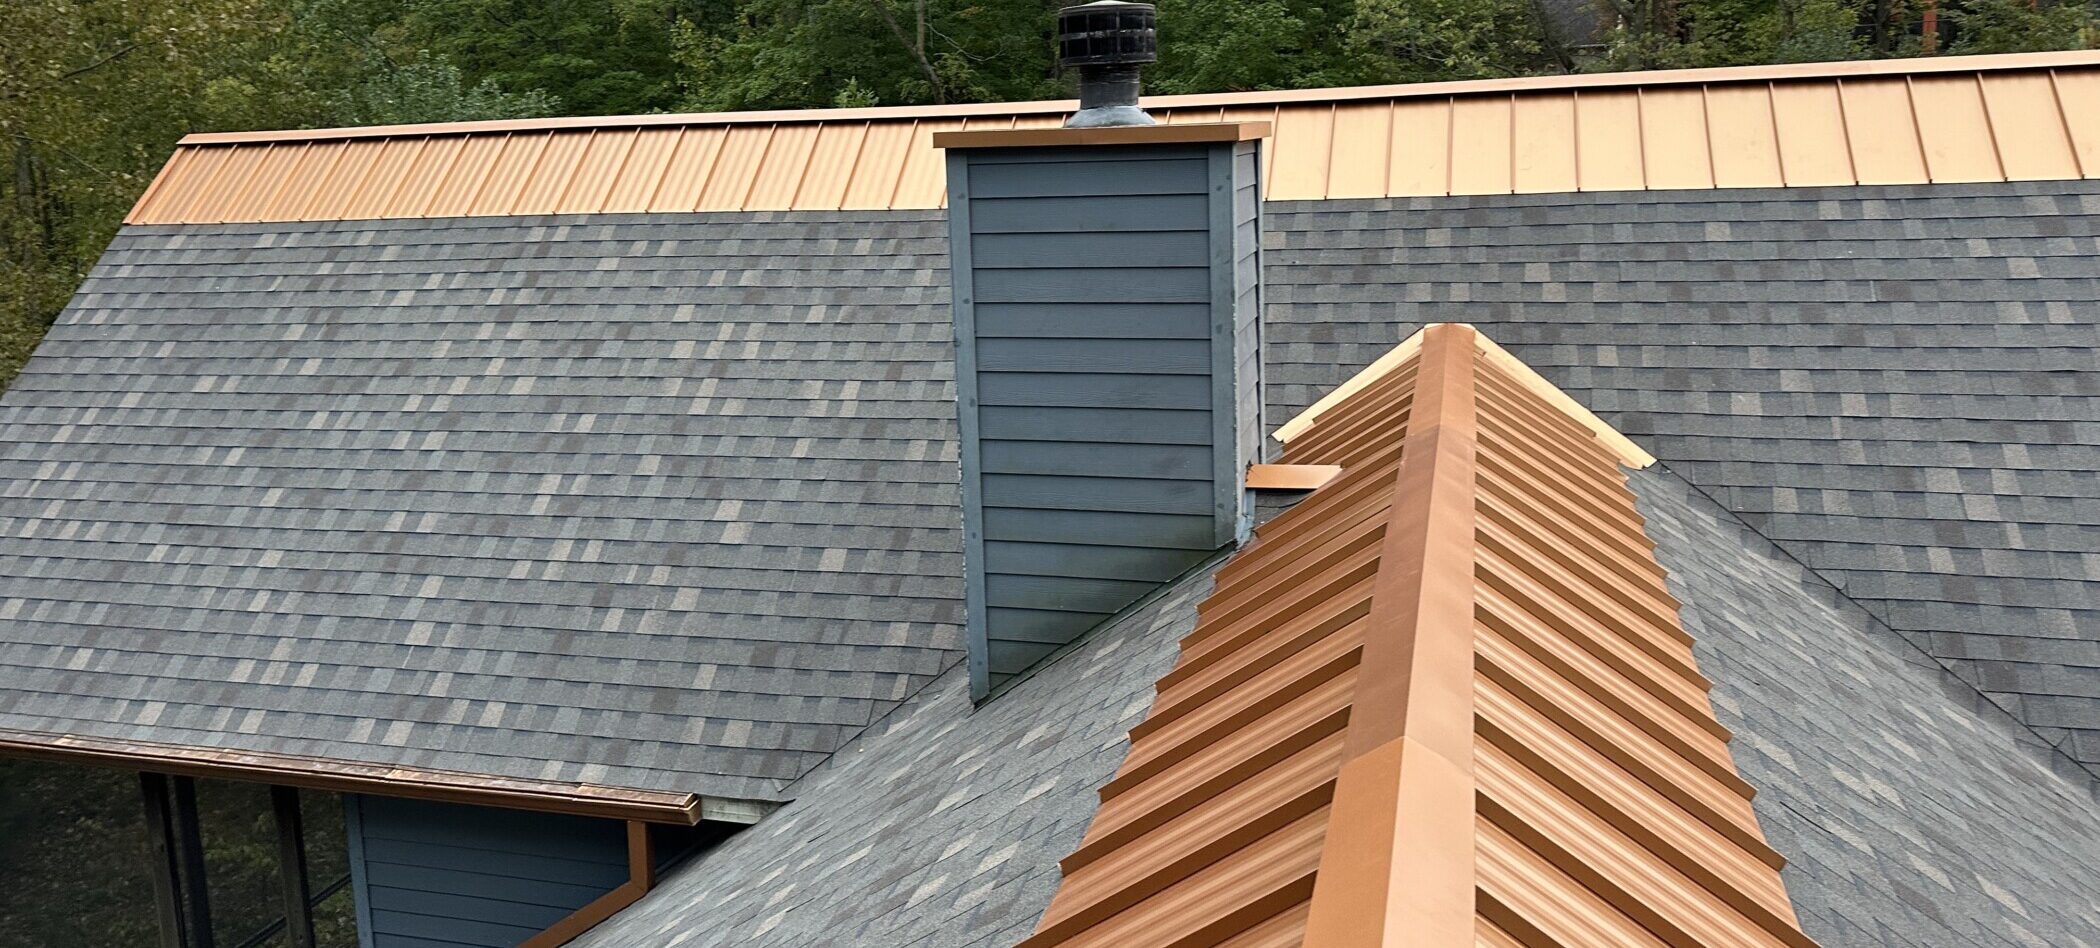 Shingle roof with copper metal ridge cap installed by Shingle and Metal Roofs